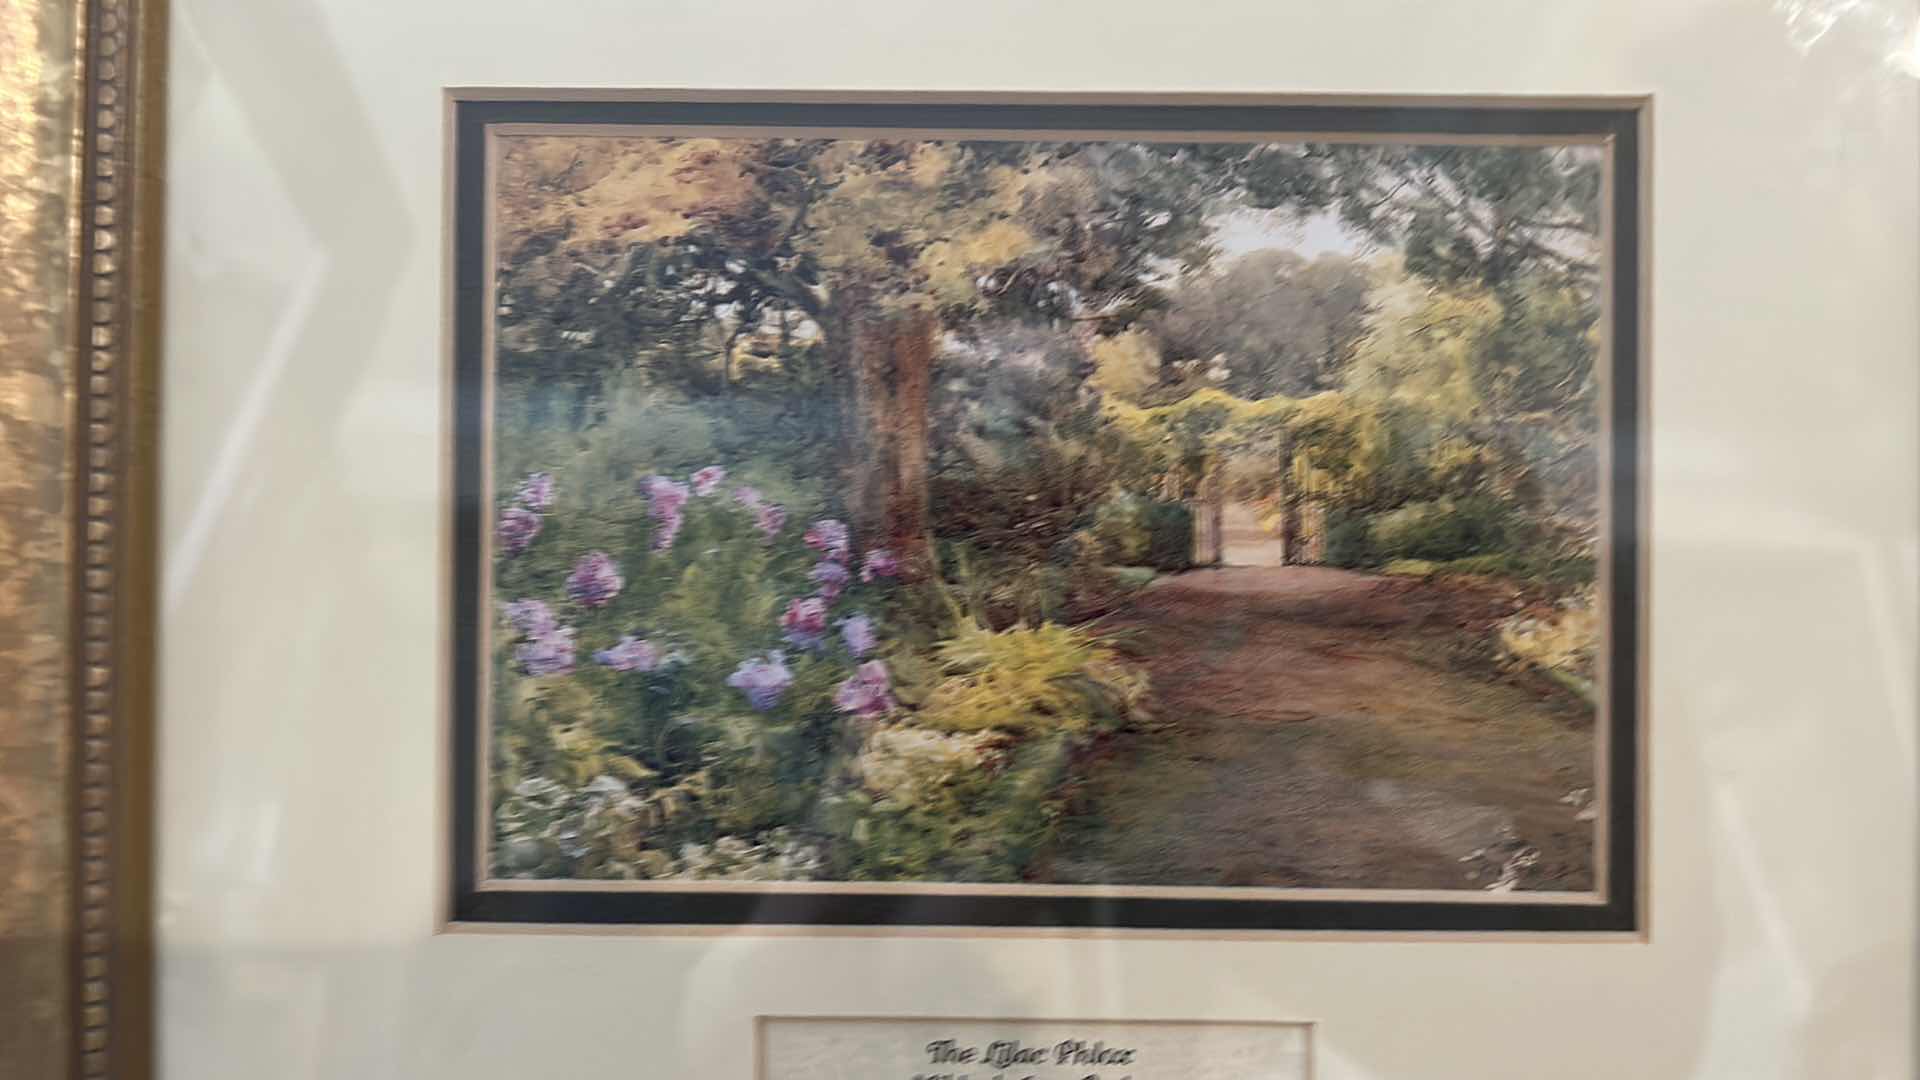 Photo 3 of “THE LILAC PHLAX” BY MILDRED ANNE BUTLER SIGNED ARTWORK, FRAMED 12 3/4” x 11”